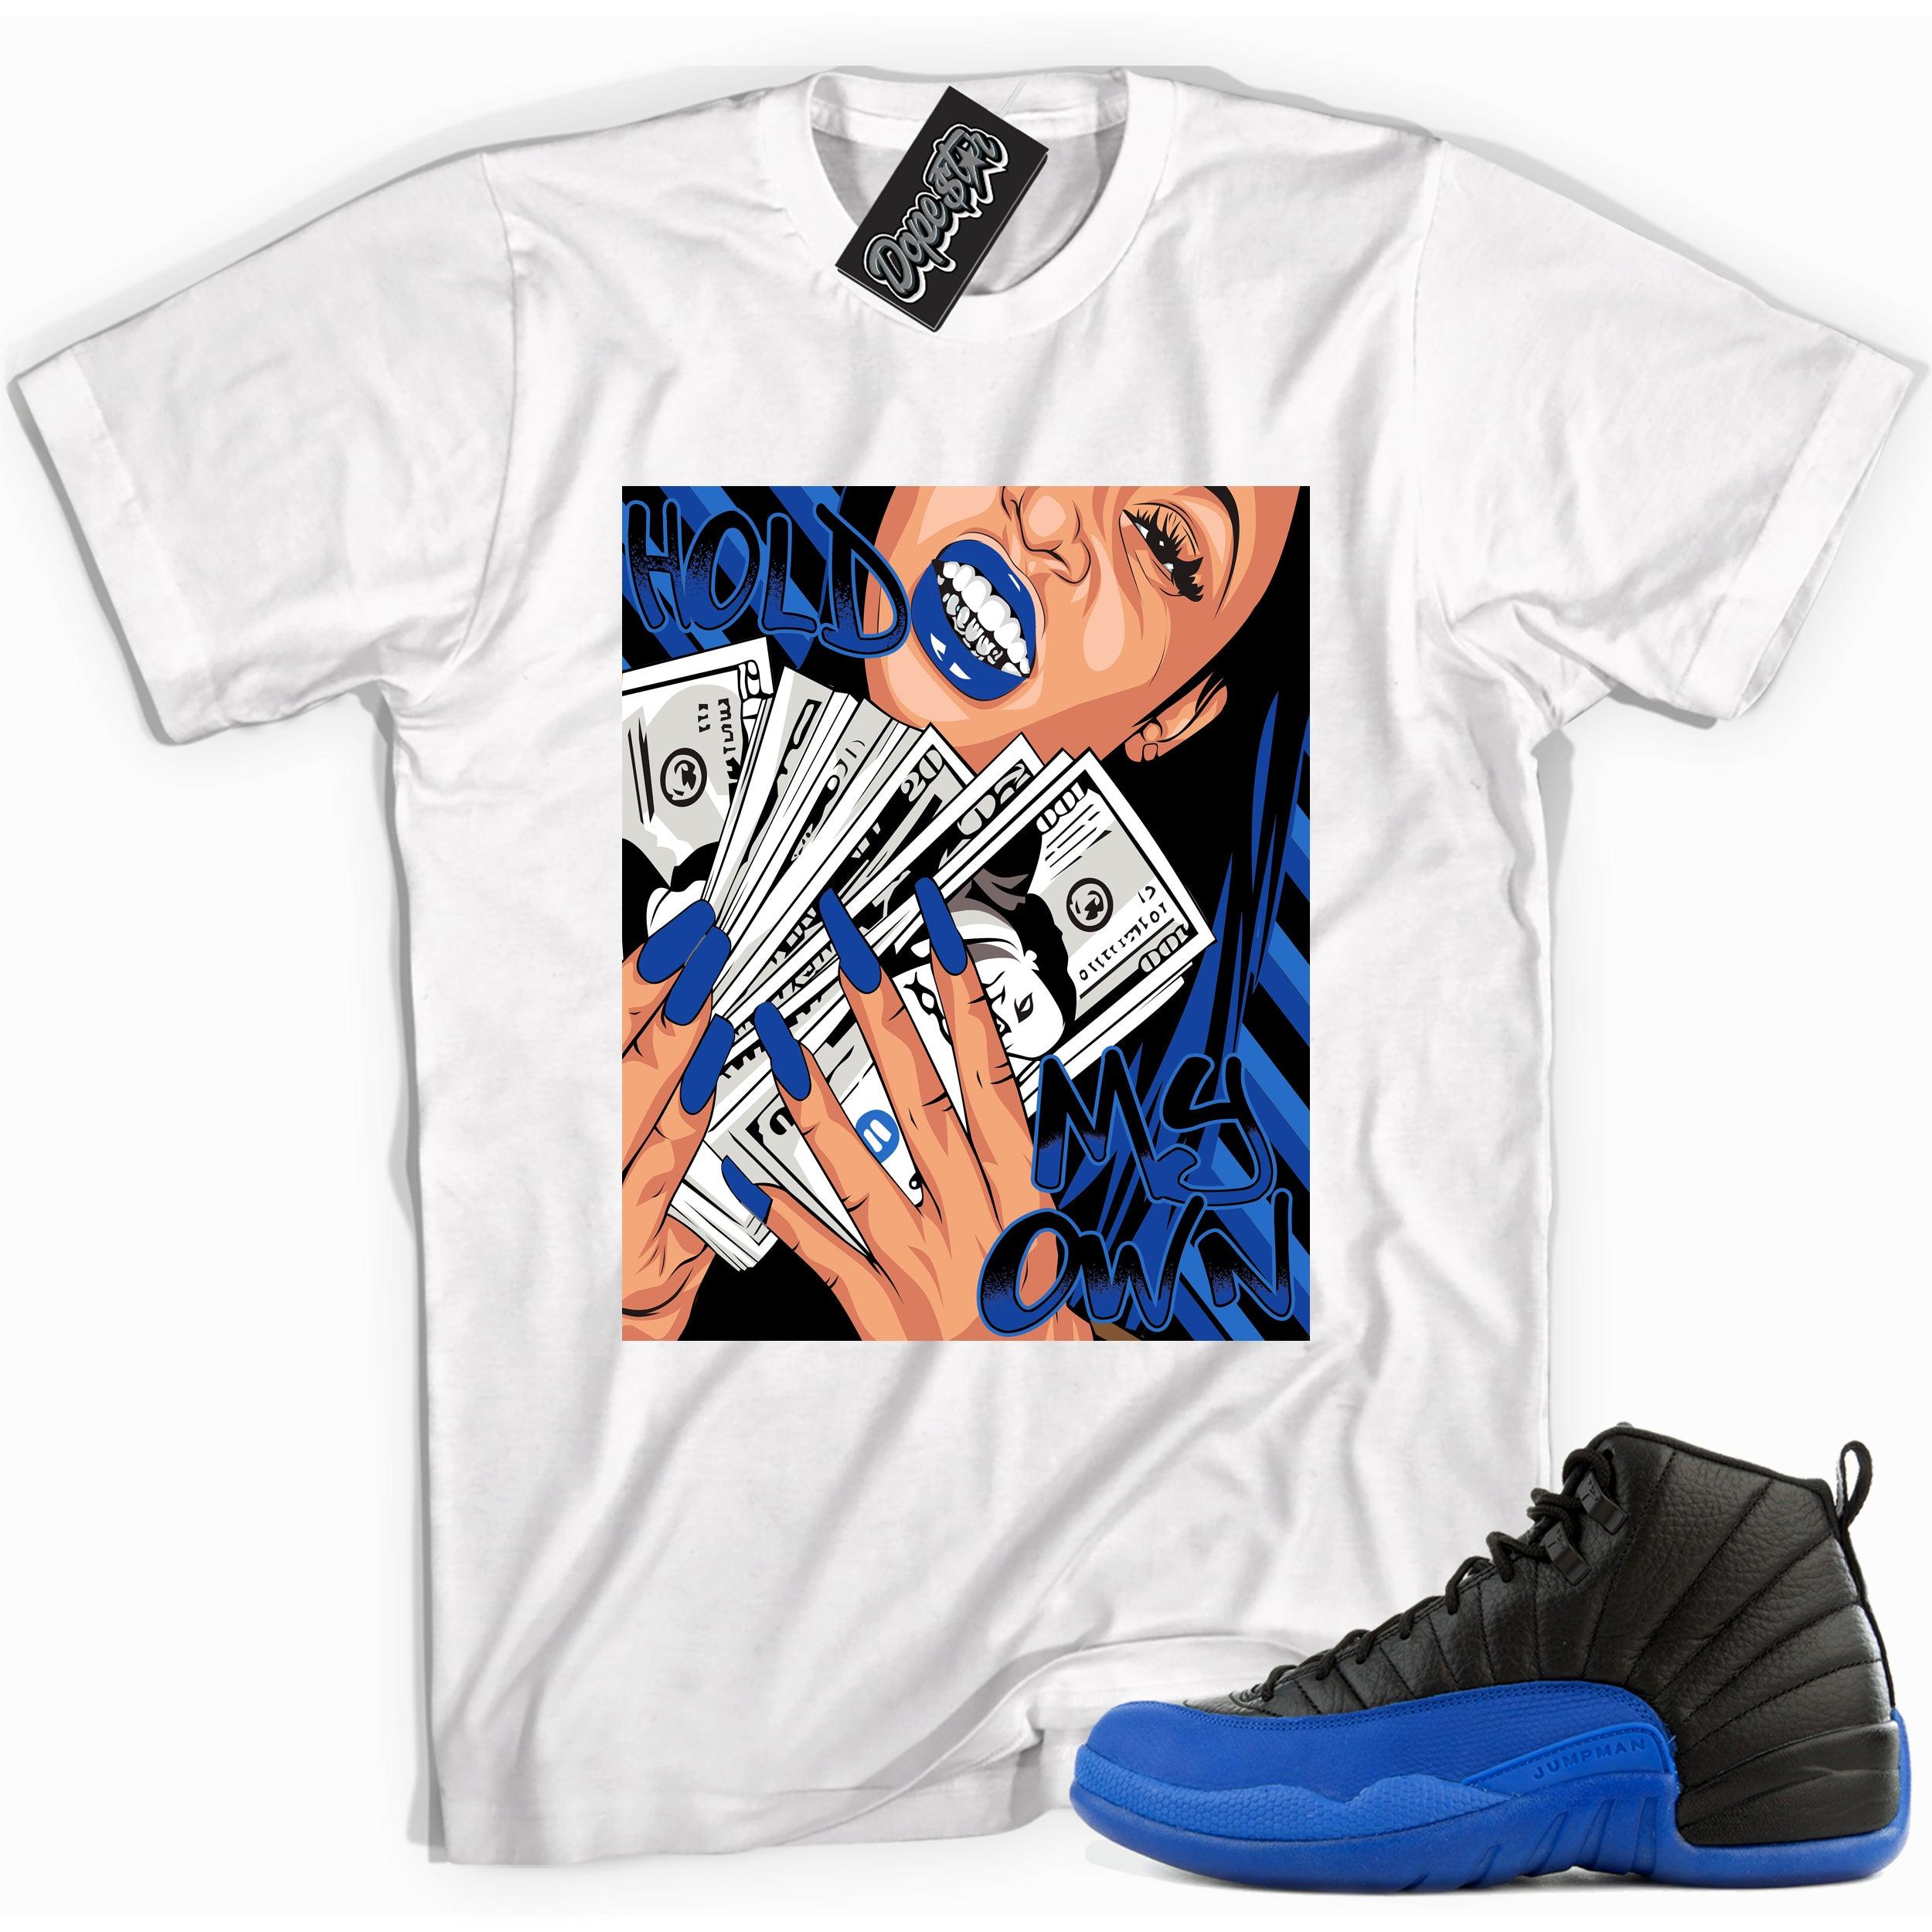 Cool white graphic tee with 'hold my own' print, that perfectly matches Air Jordan 12 Retro Black Game Royal sneakers.